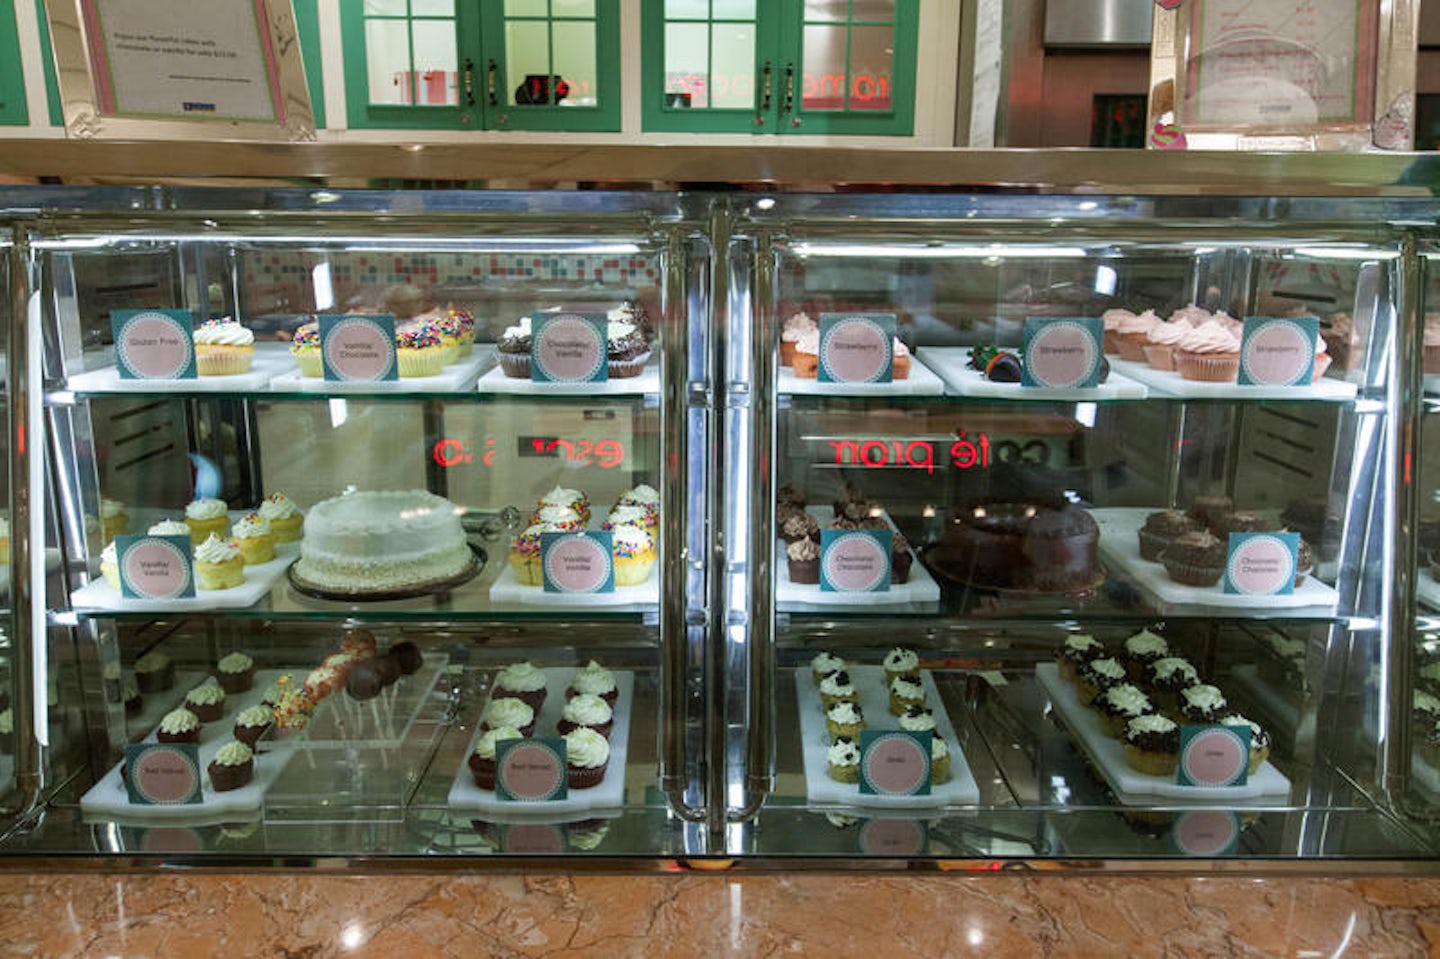 The Cupcake Cupboard on Independence of the Seas